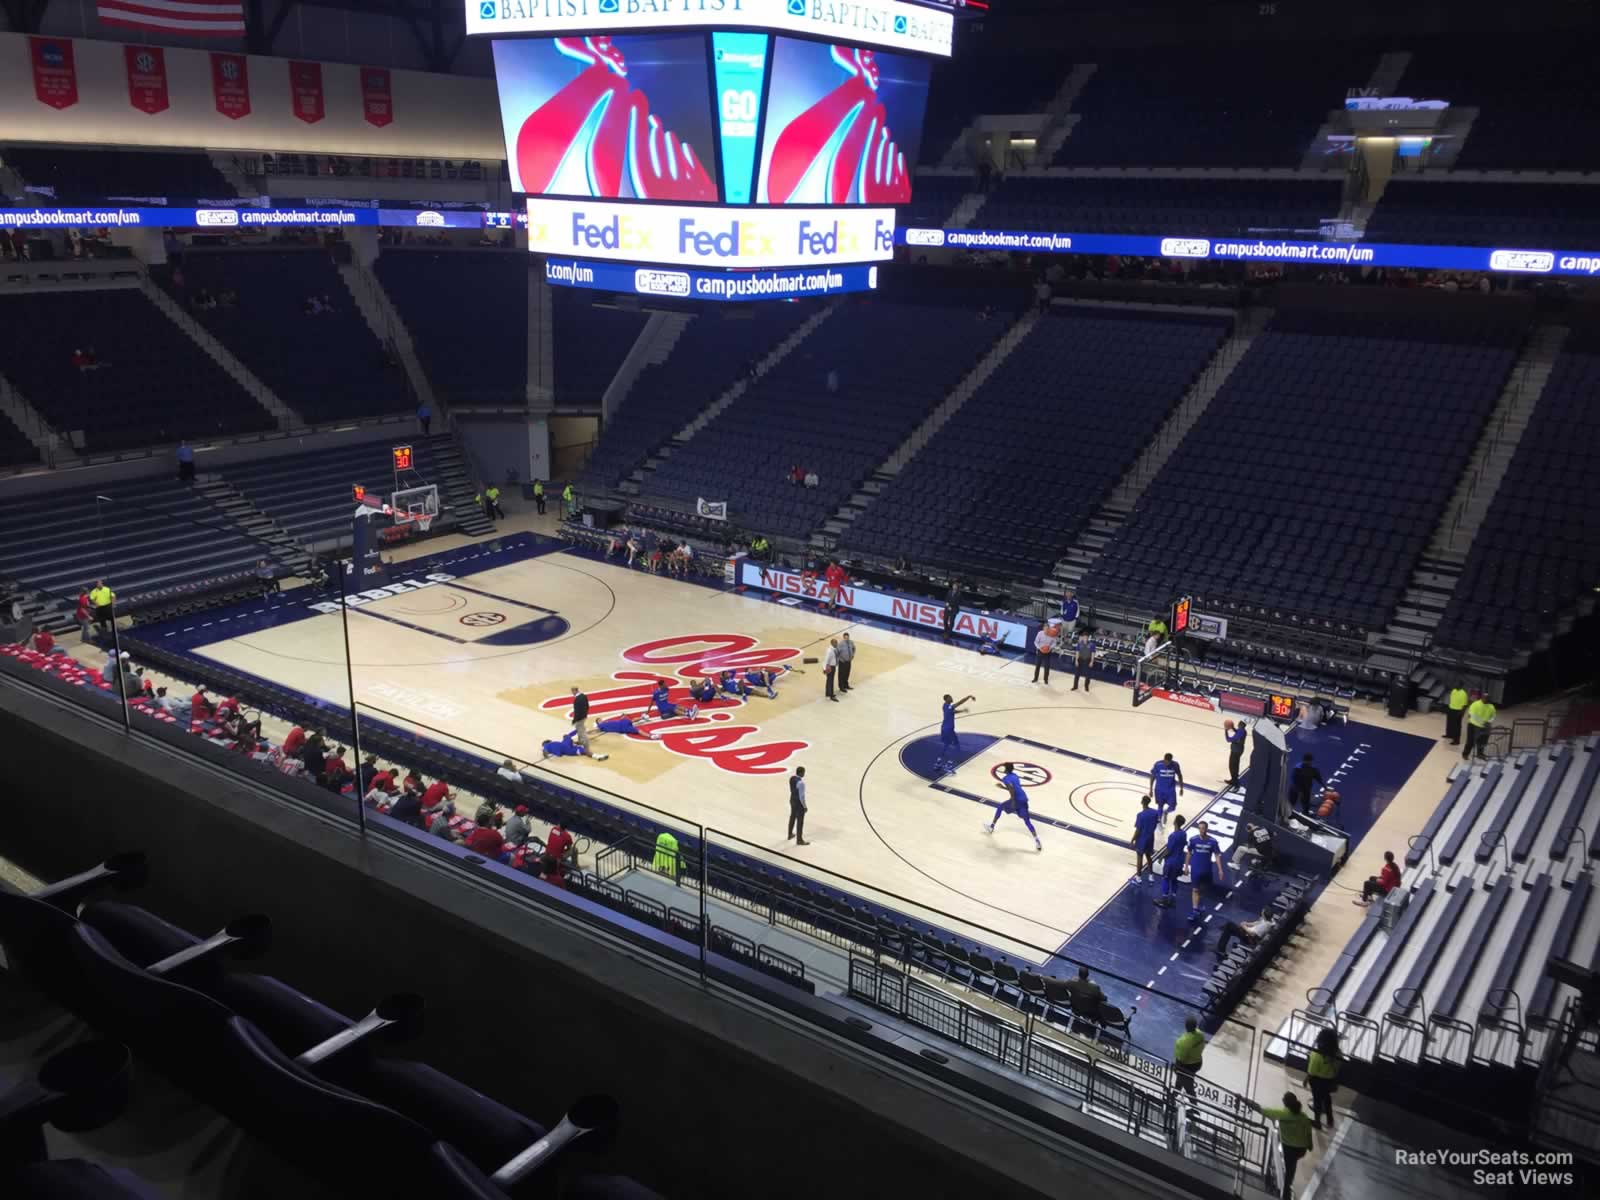 section 201, row 3 seat view  - pavilion at ole miss